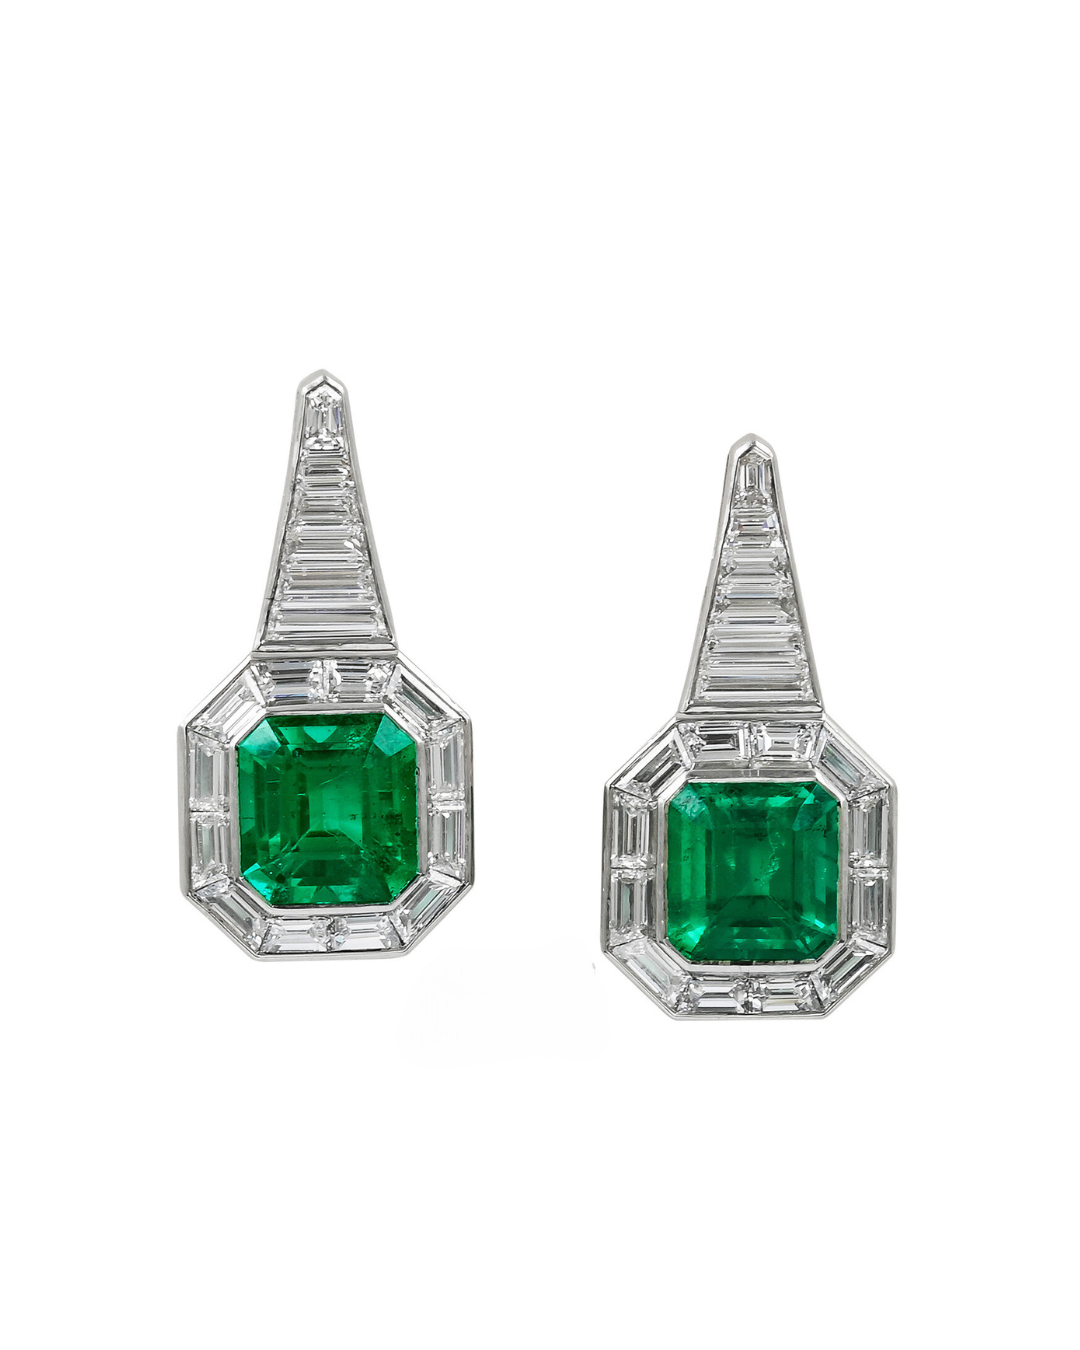 Sophia D. Mosaic Earrings with Colombian Emerald Center